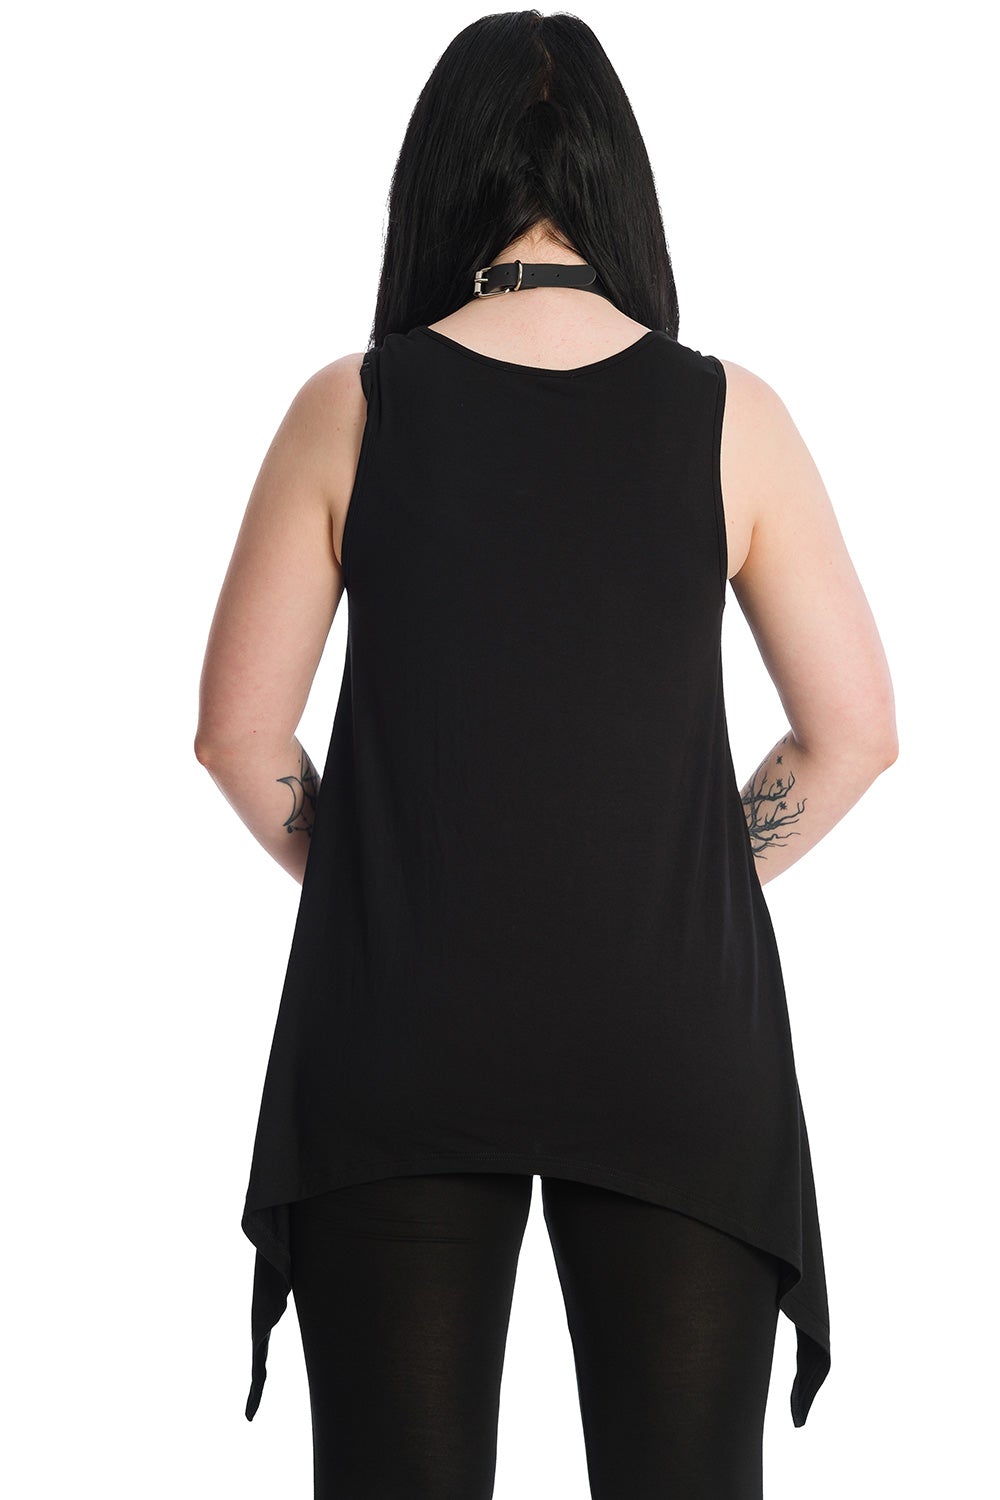 Alternative model wearing long line black vest top with space print and cat feature on the front. Model is wearing matching leggings. Plain black back. 